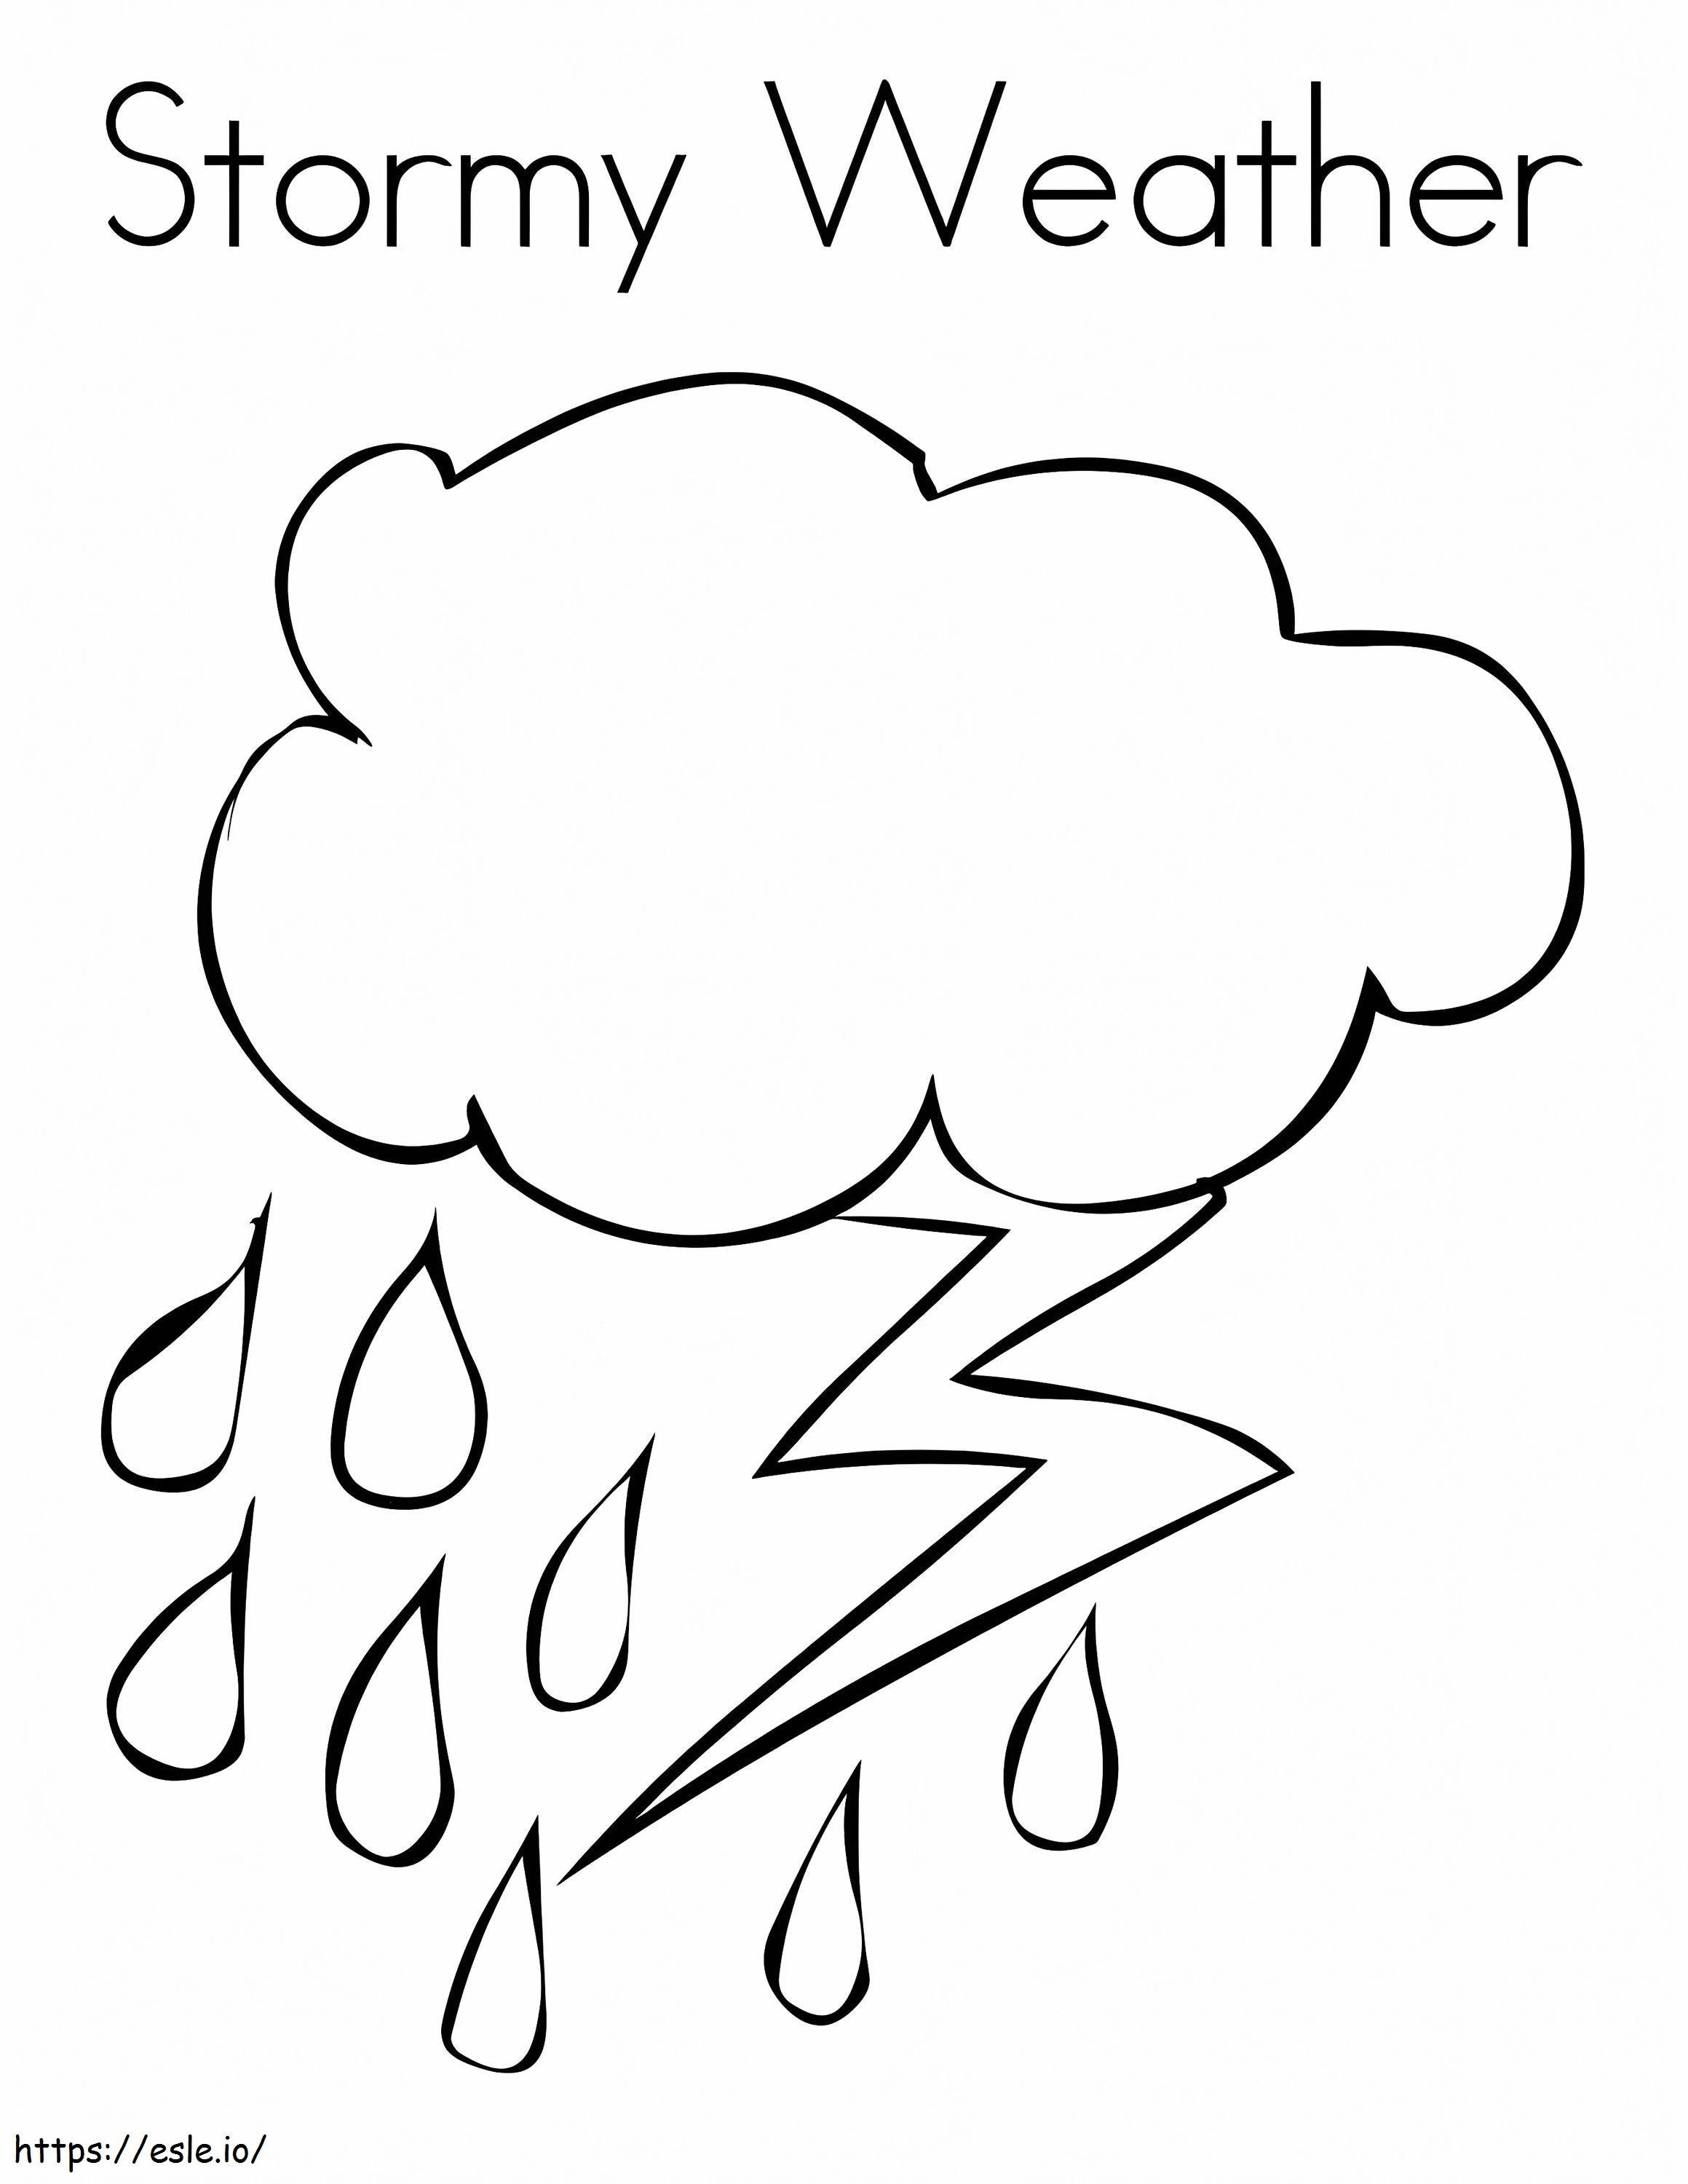 Stormy Weather coloring page